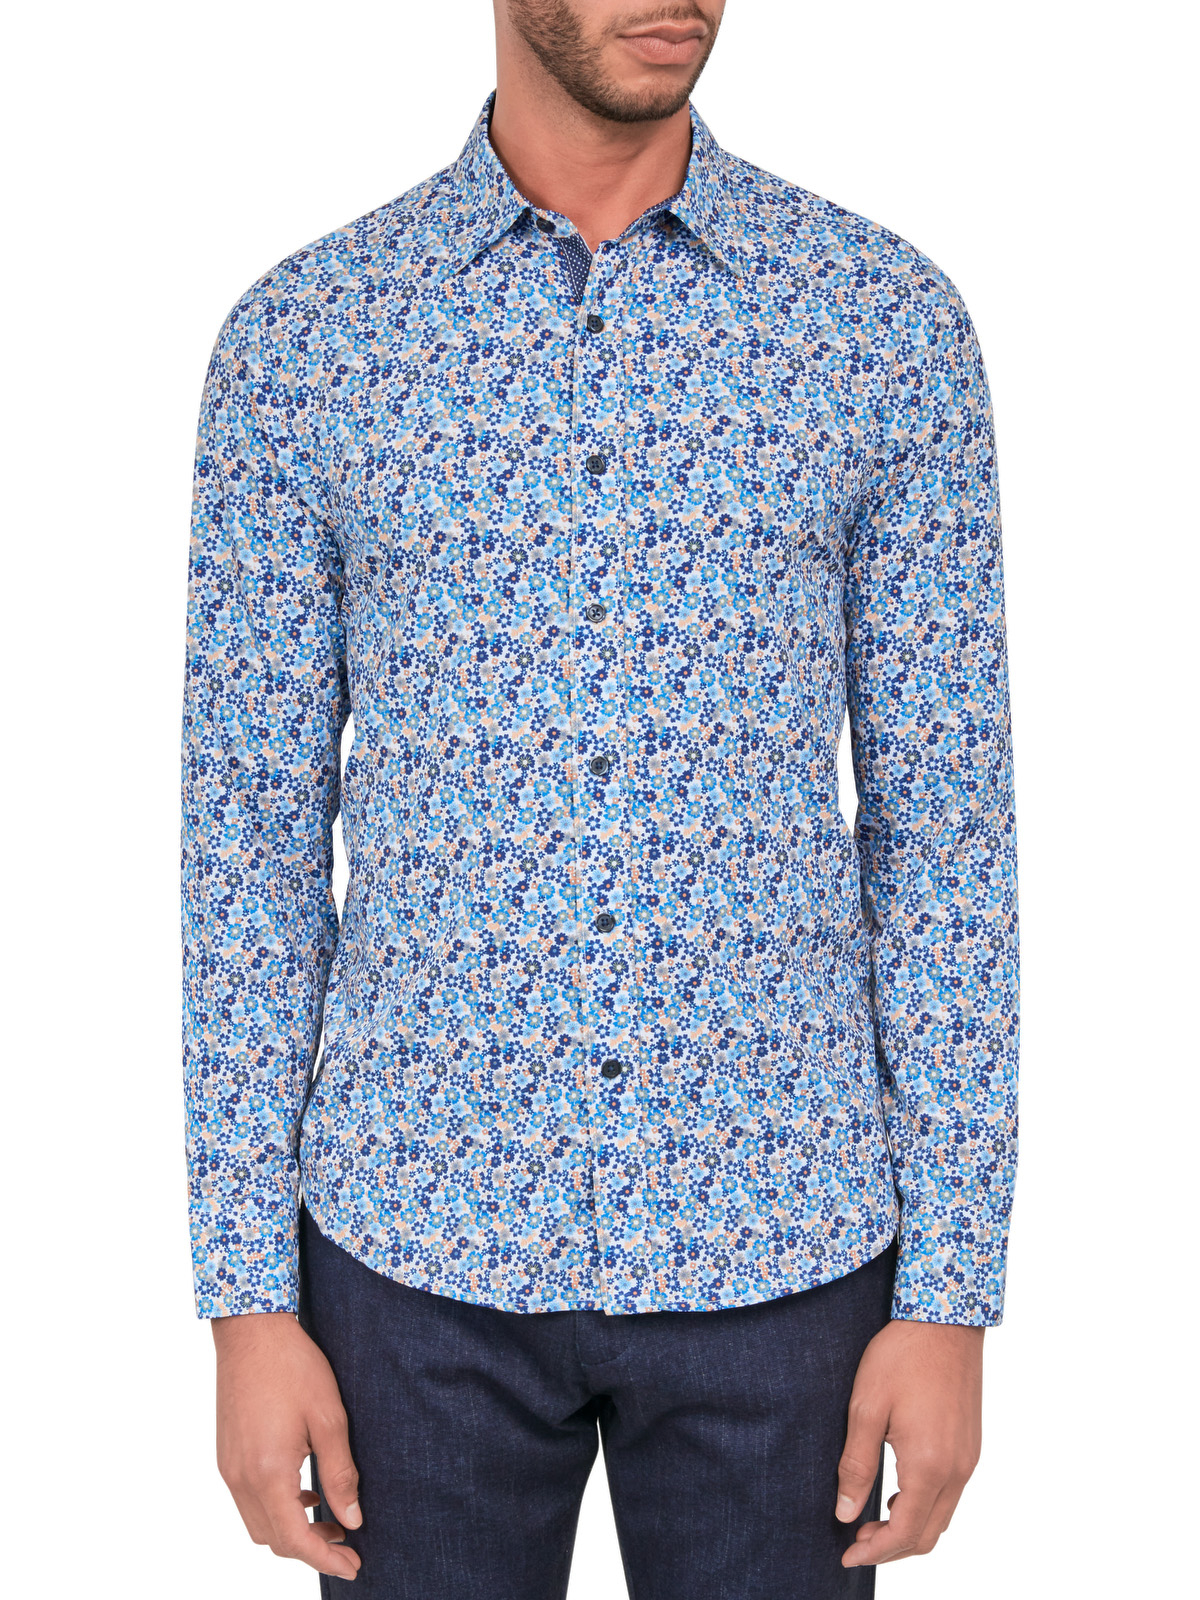 CON.STRUCT FLORAL SHIRT